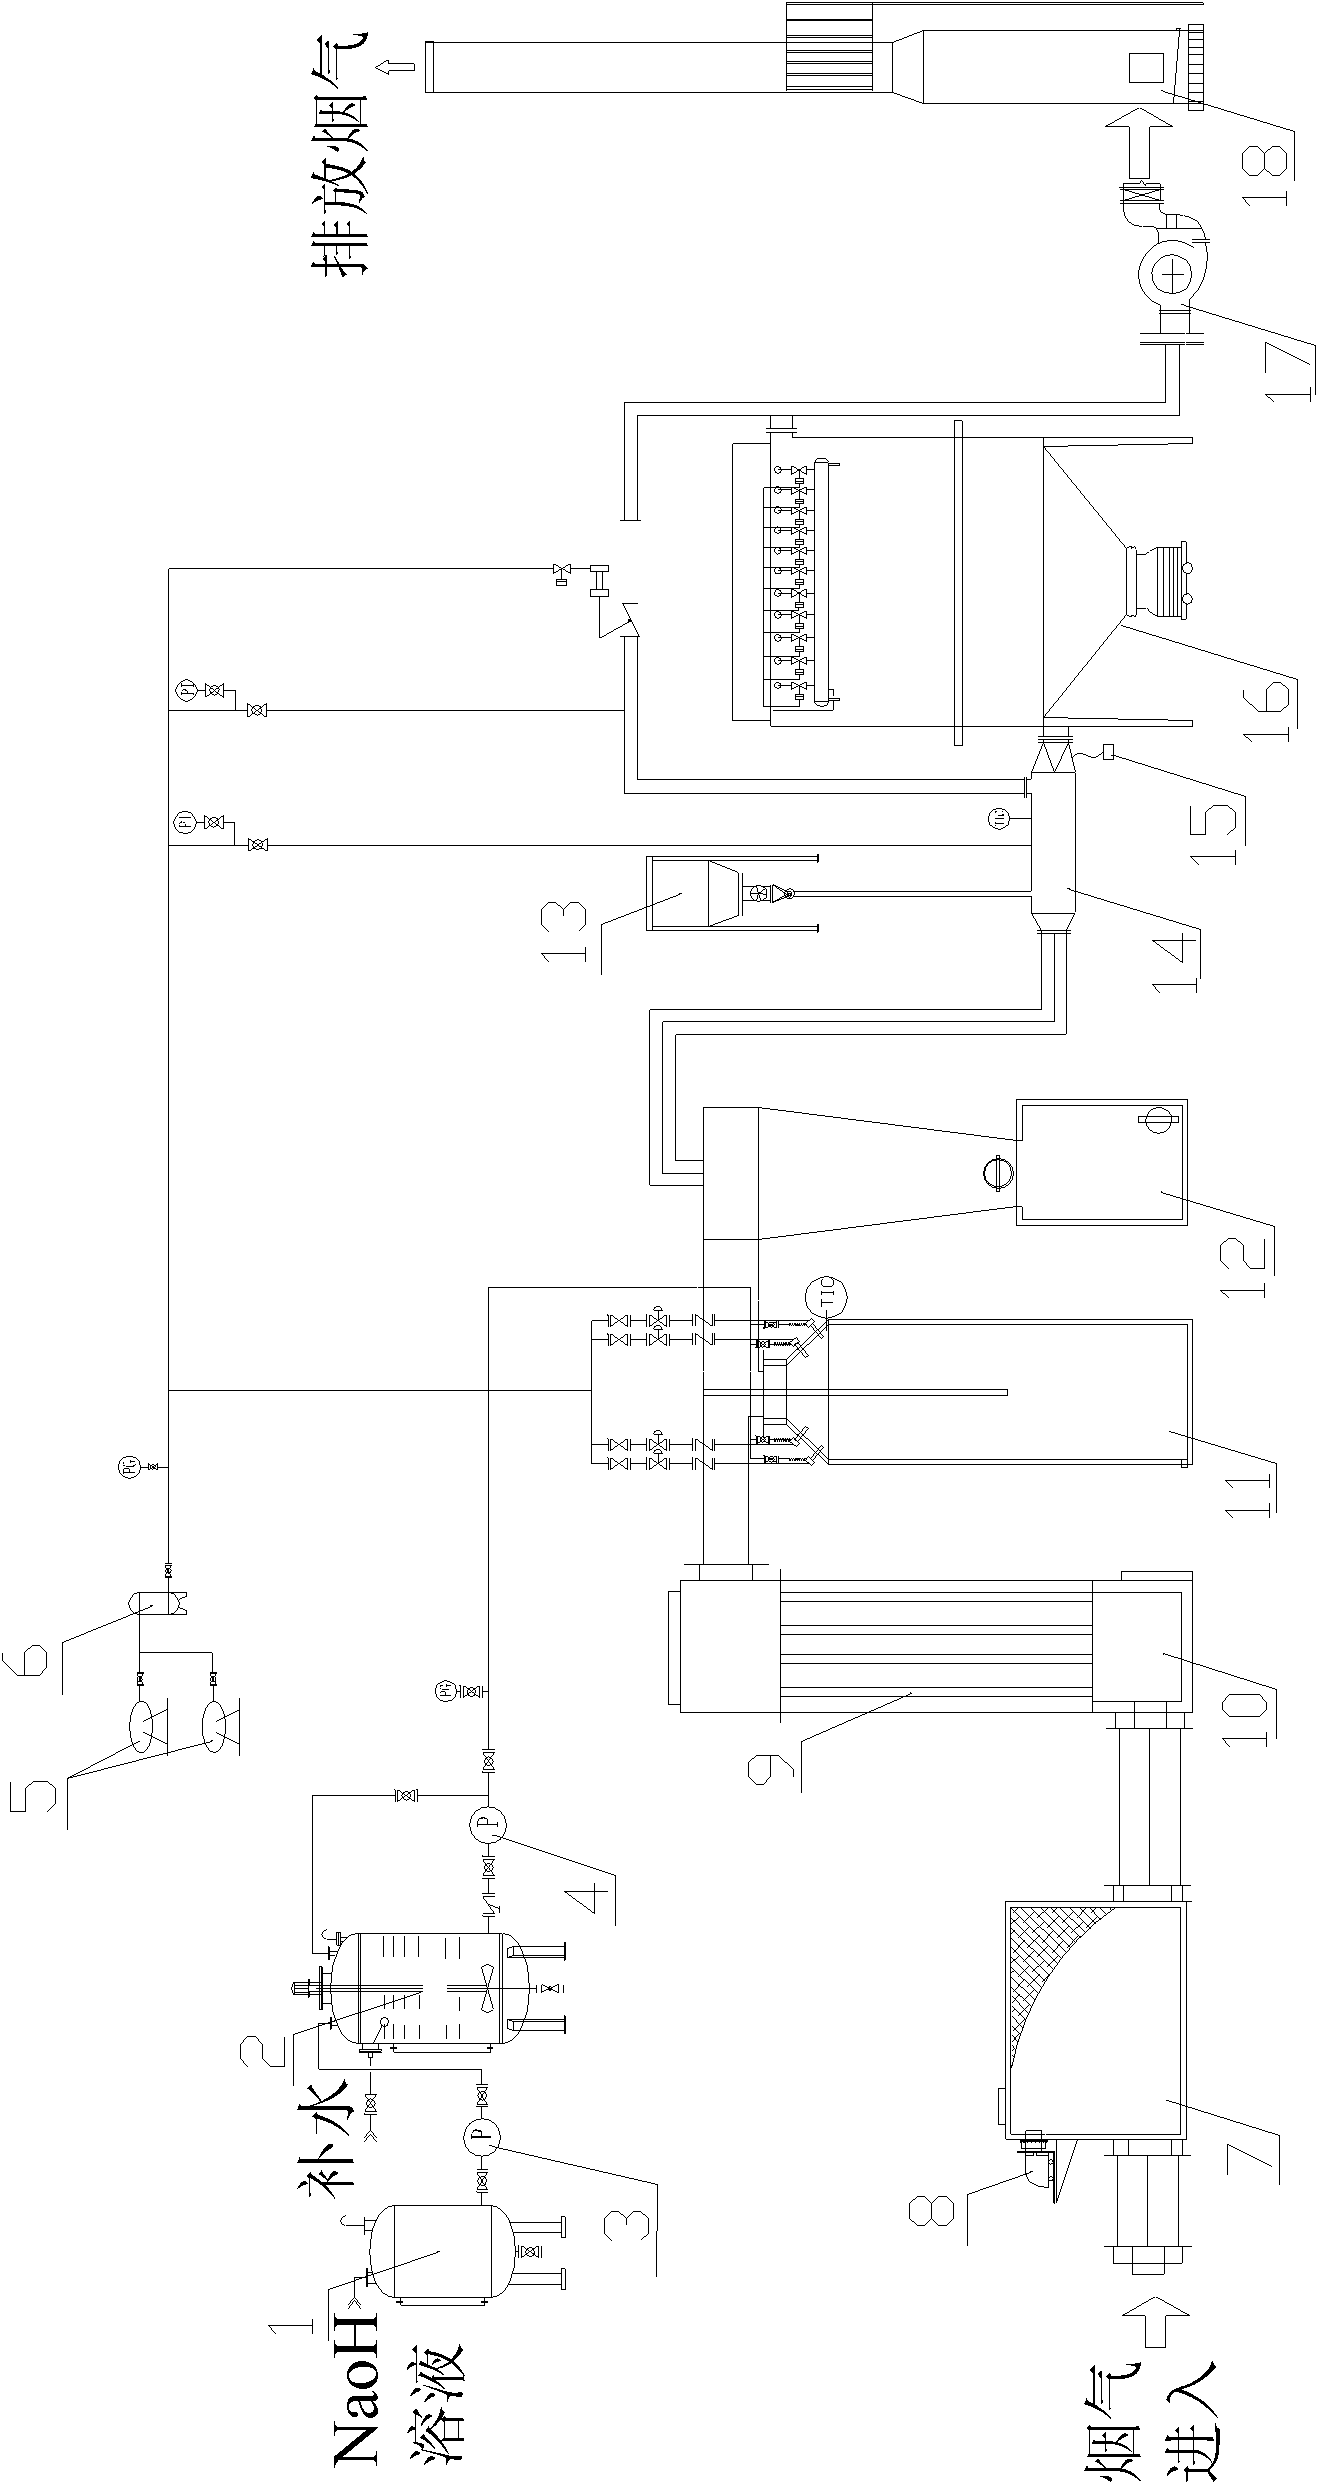 Purification treatment device for incineration flue gas